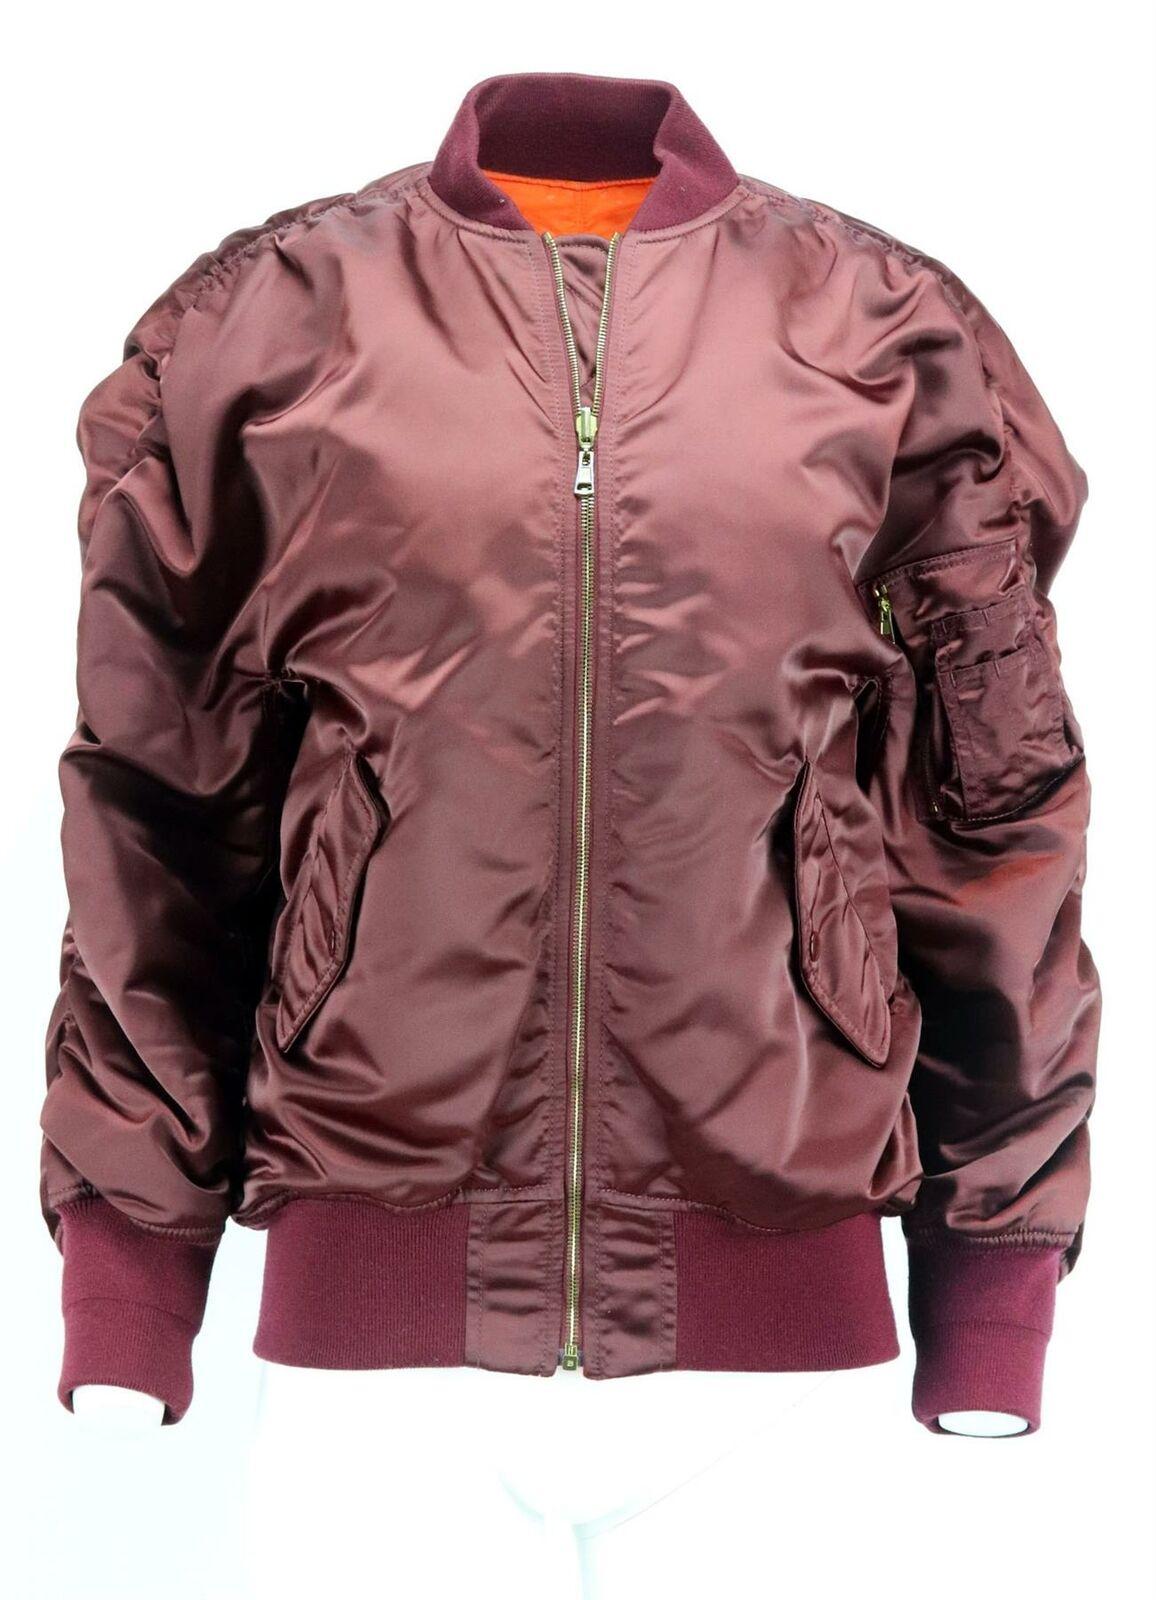 This Balenciaga burgundy satin bomber jacket has a bright-orange reversible house monogram interior, this piece is generously padded for insulation and has ruched seams that accentuate its oversized, cocoon-like shape.
Burgundy satin.
Zip fastening